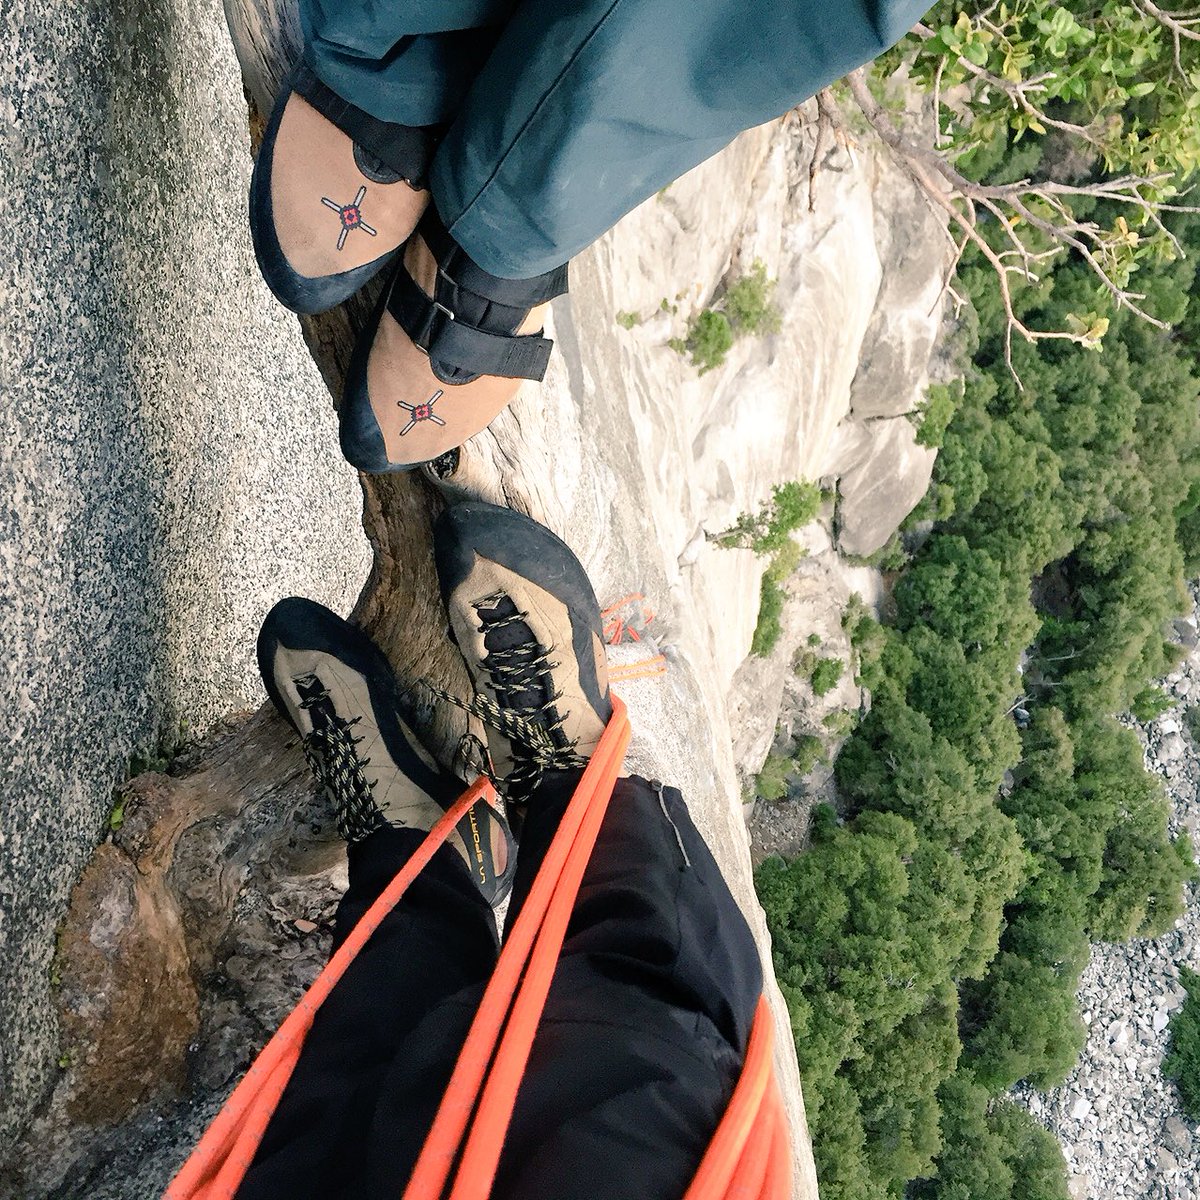 They should call this the tree of life. Climbing Serenity Crack in #yosemite with @kjorgeson https://t.co/G0er8Aq8UL